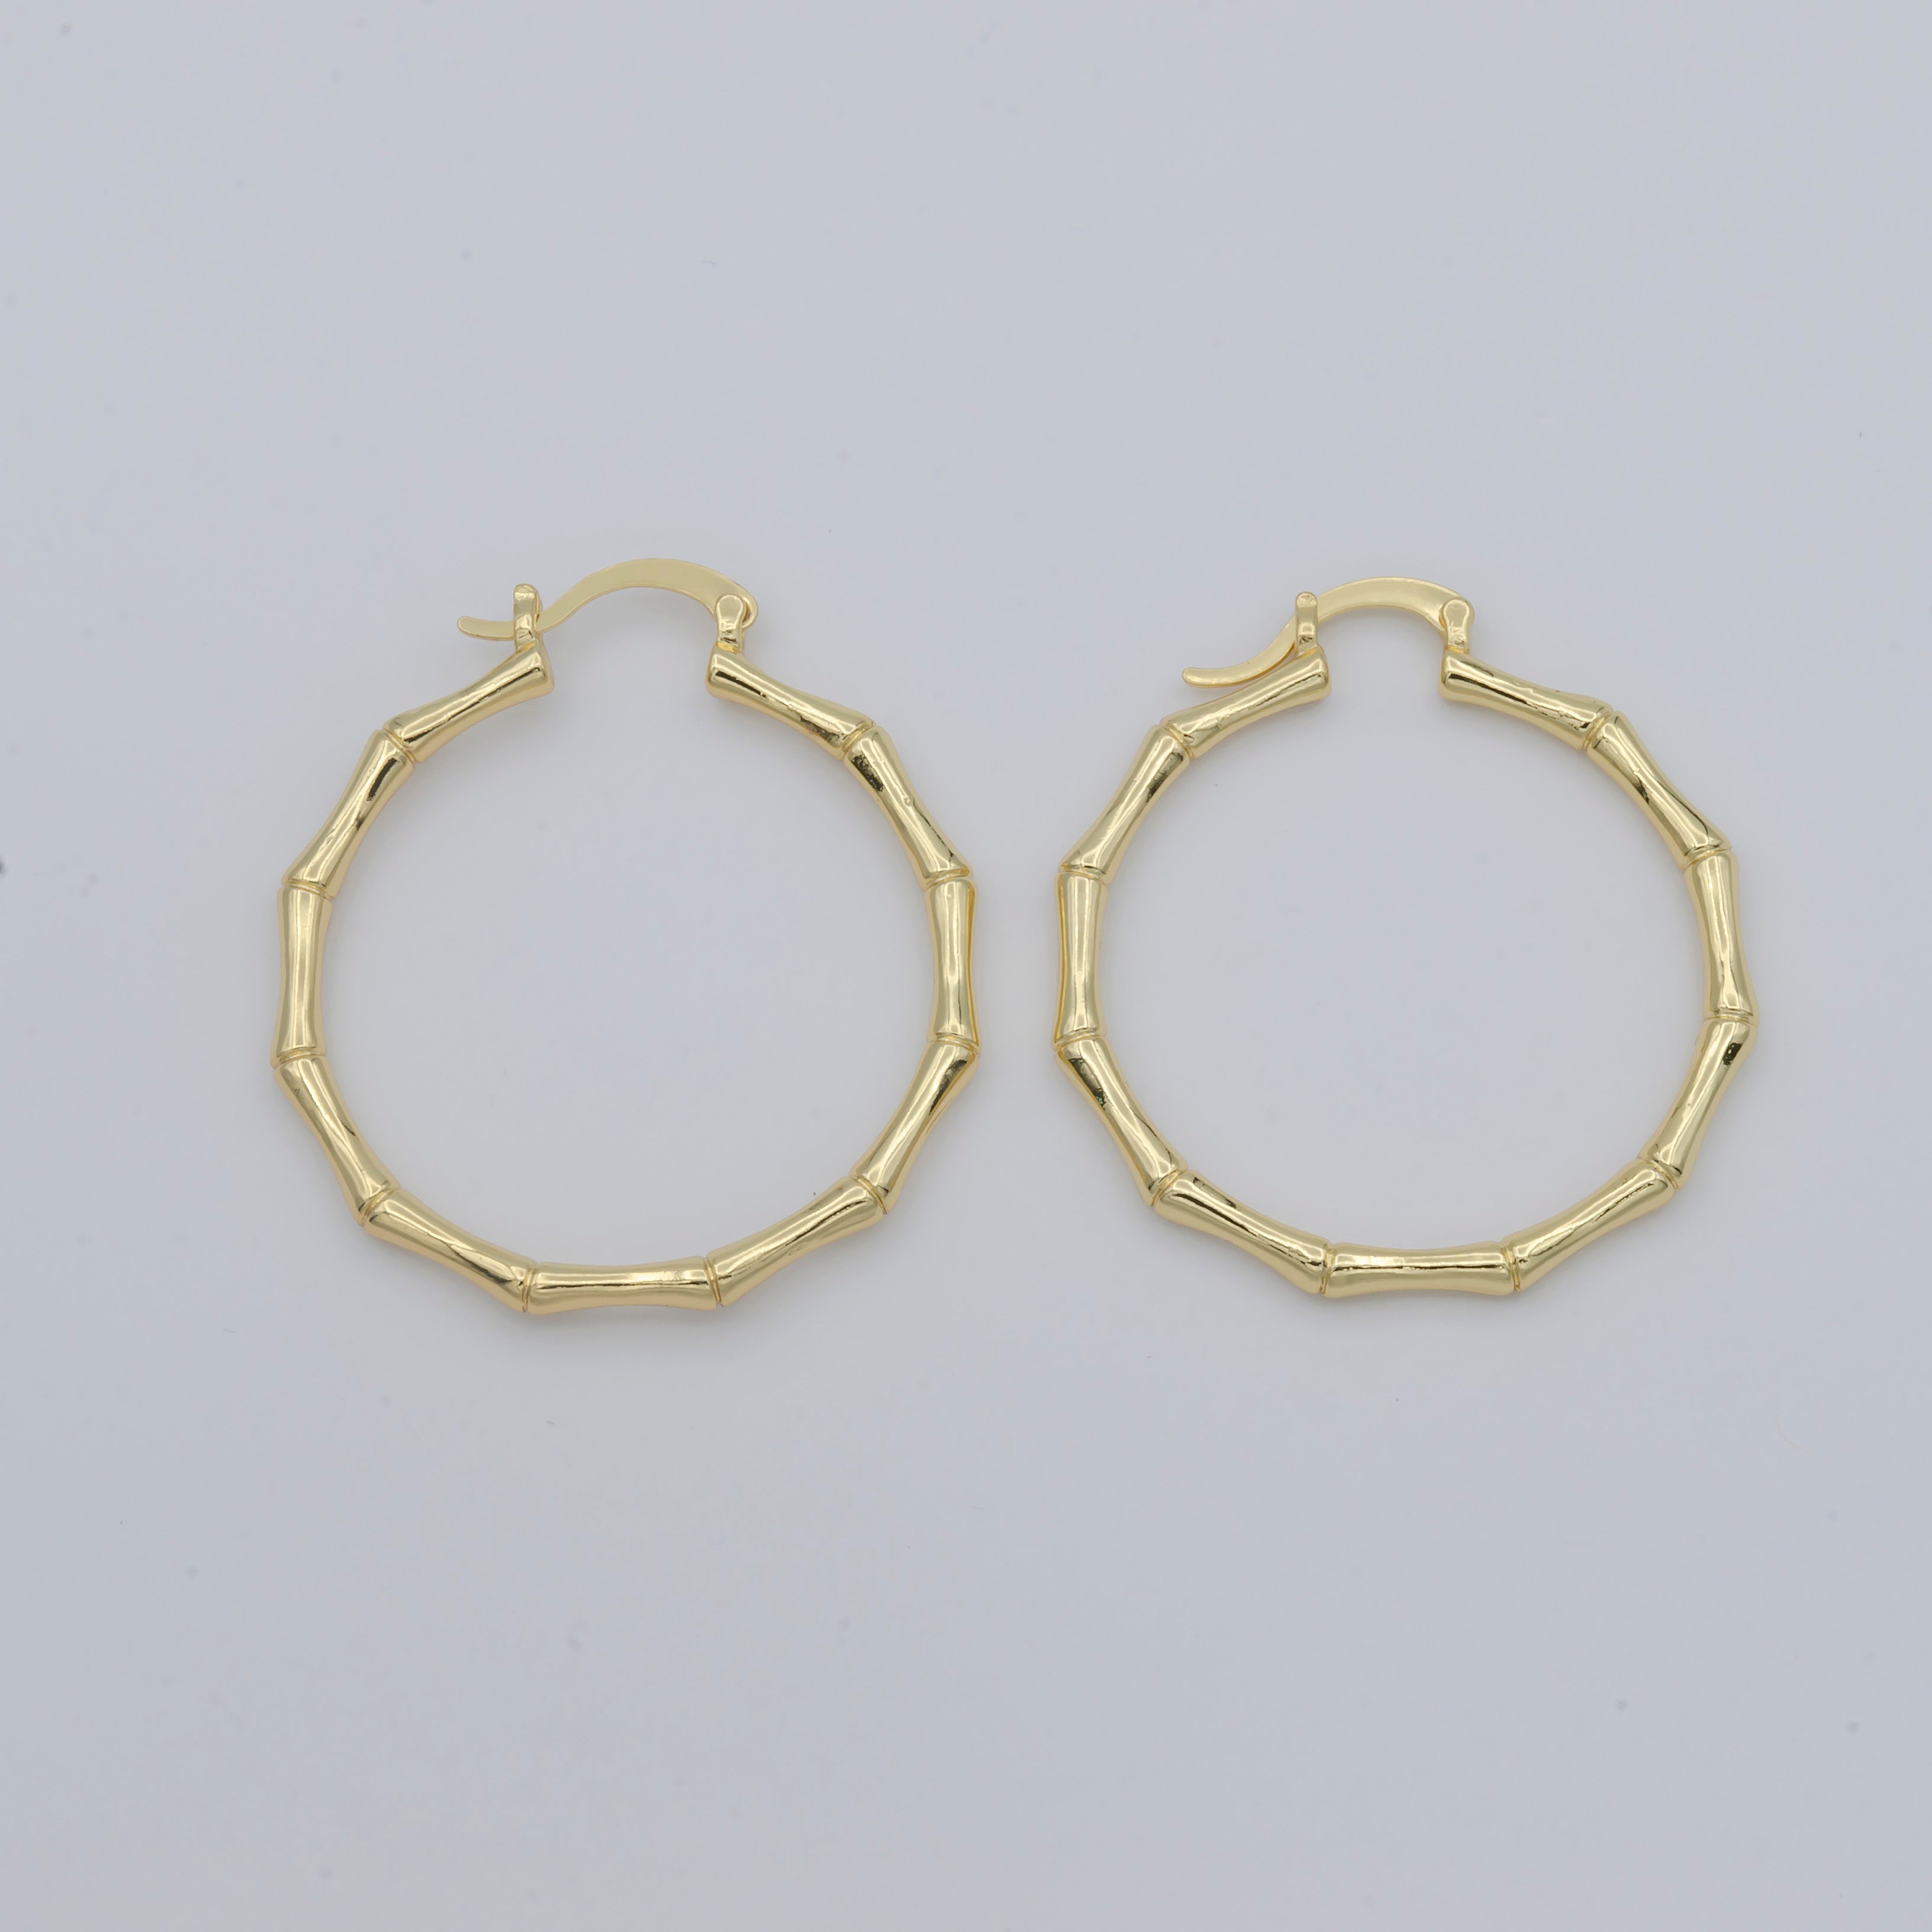 1pair Golden Kinked Round Huggies Earrings, Plain Gold Filled Geometric Formal/Casual Daily Earring Jewelry - DLUXCA